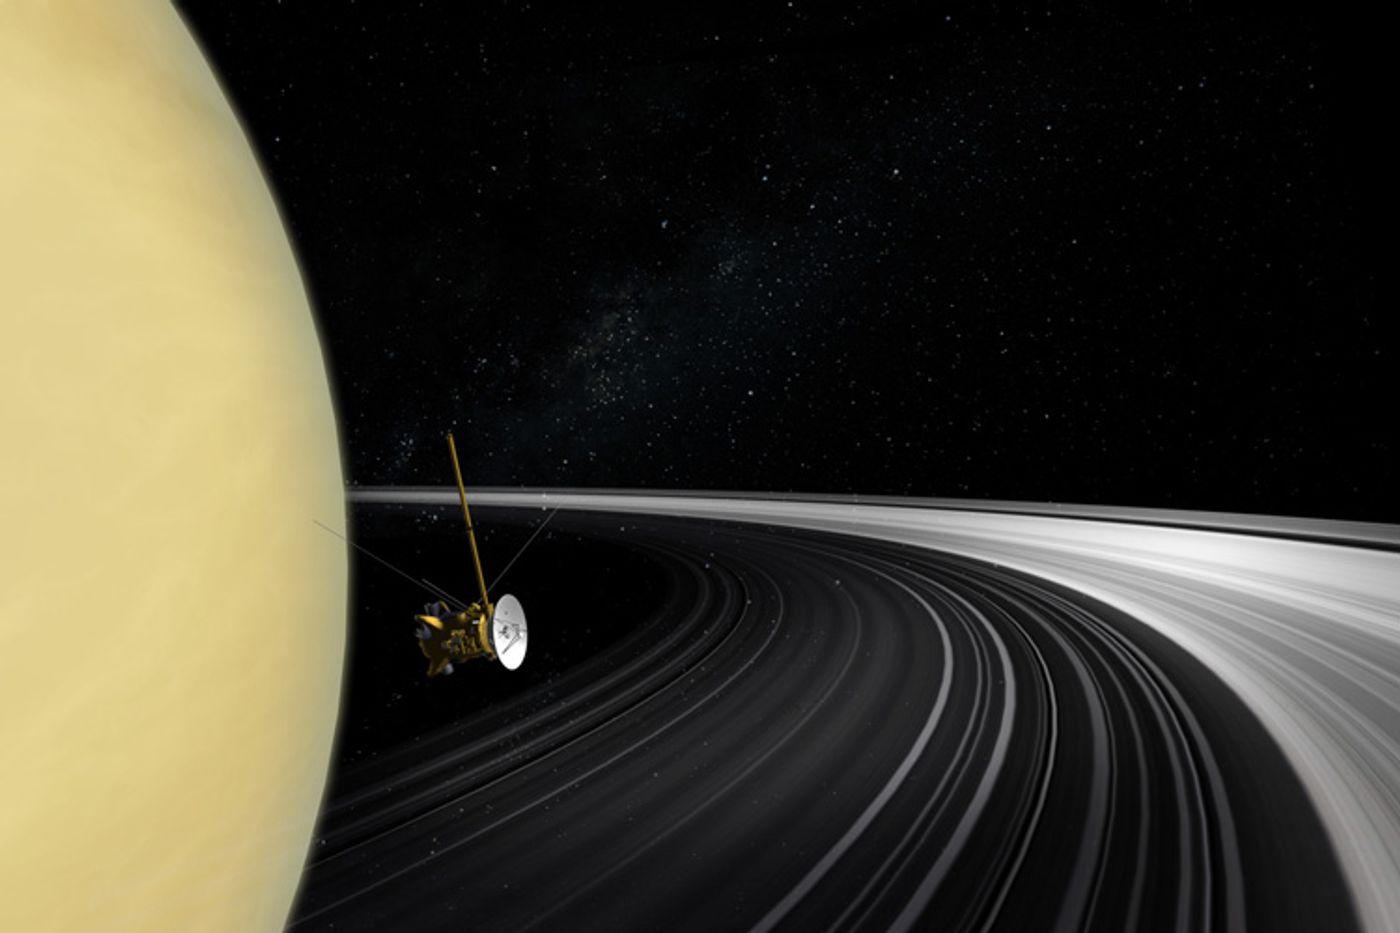 An artist's impression of the Cassini spacecraft in between Saturn and its planetary rings.